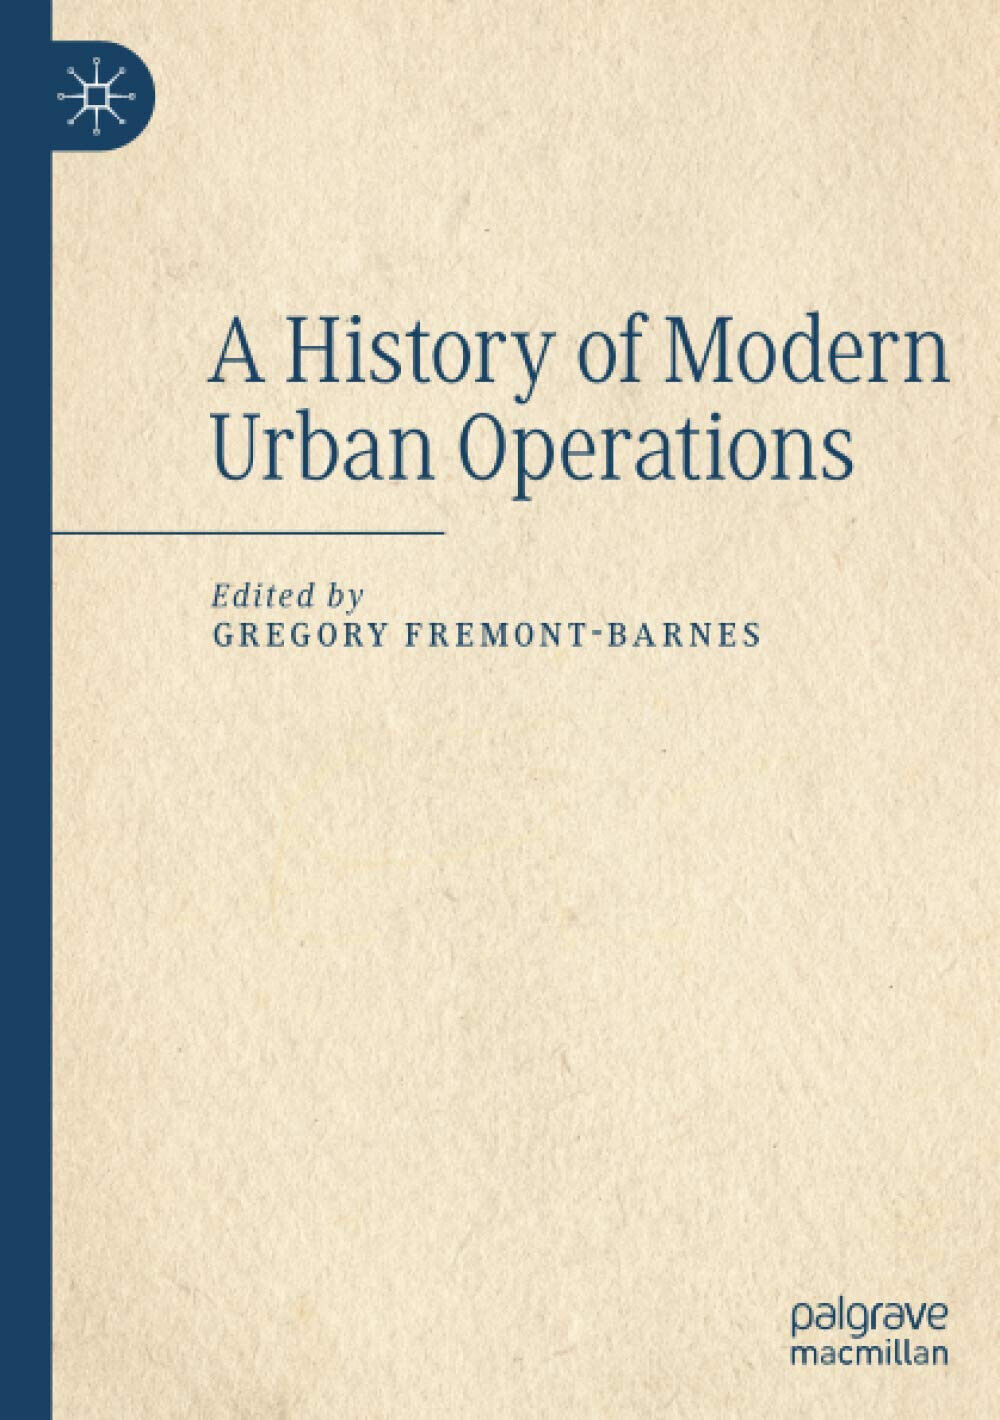 A History of Modern Urban Operations - Gregory Fremont-Barnes - Springer, 2021 libro usato